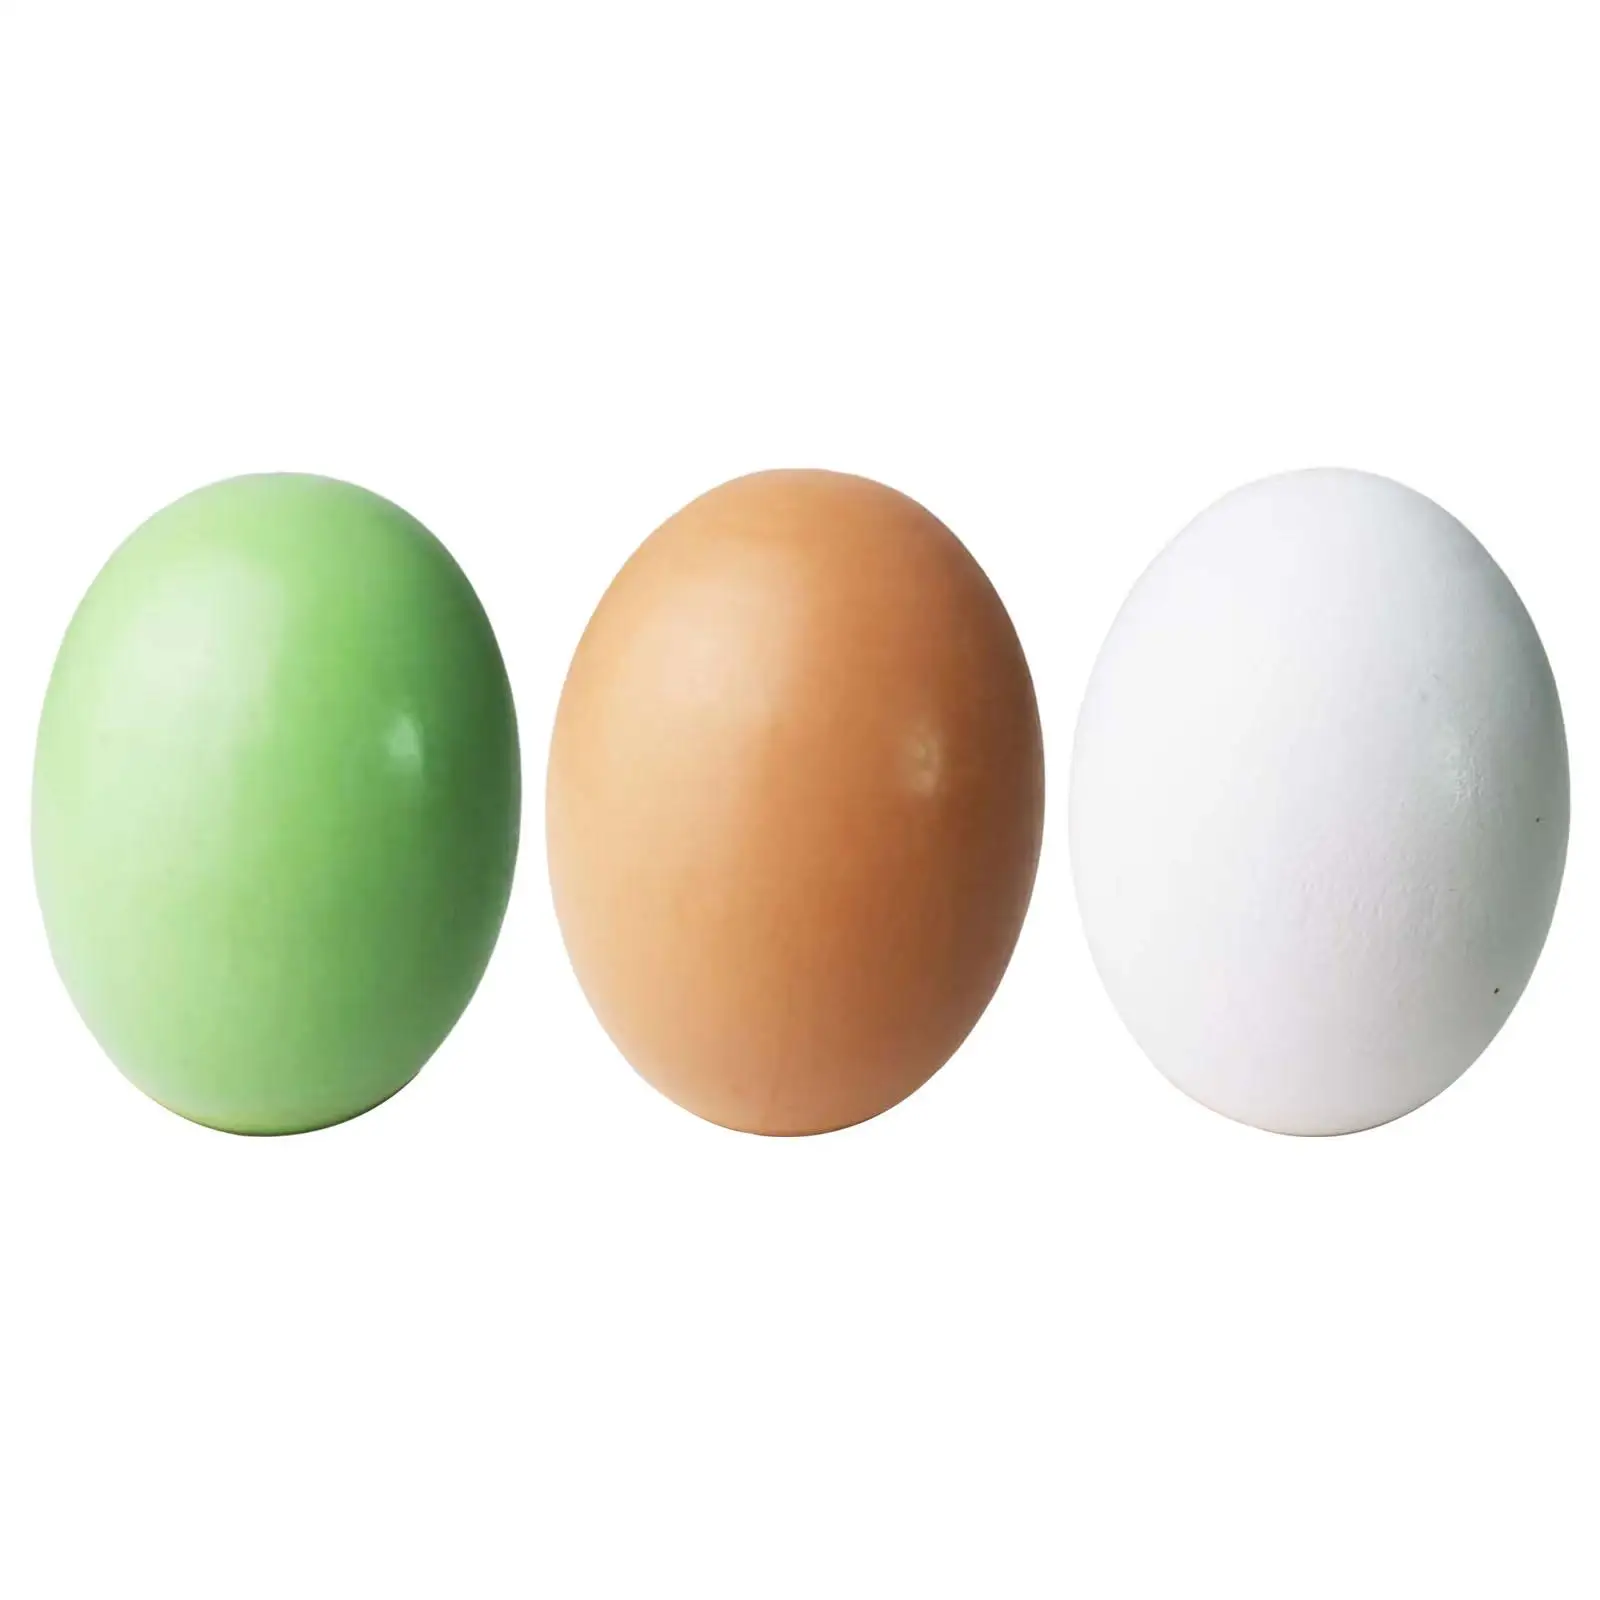 3x Wooden Simulation Eggs Developmental Toy Pretend Toy for Themed Parties Boys